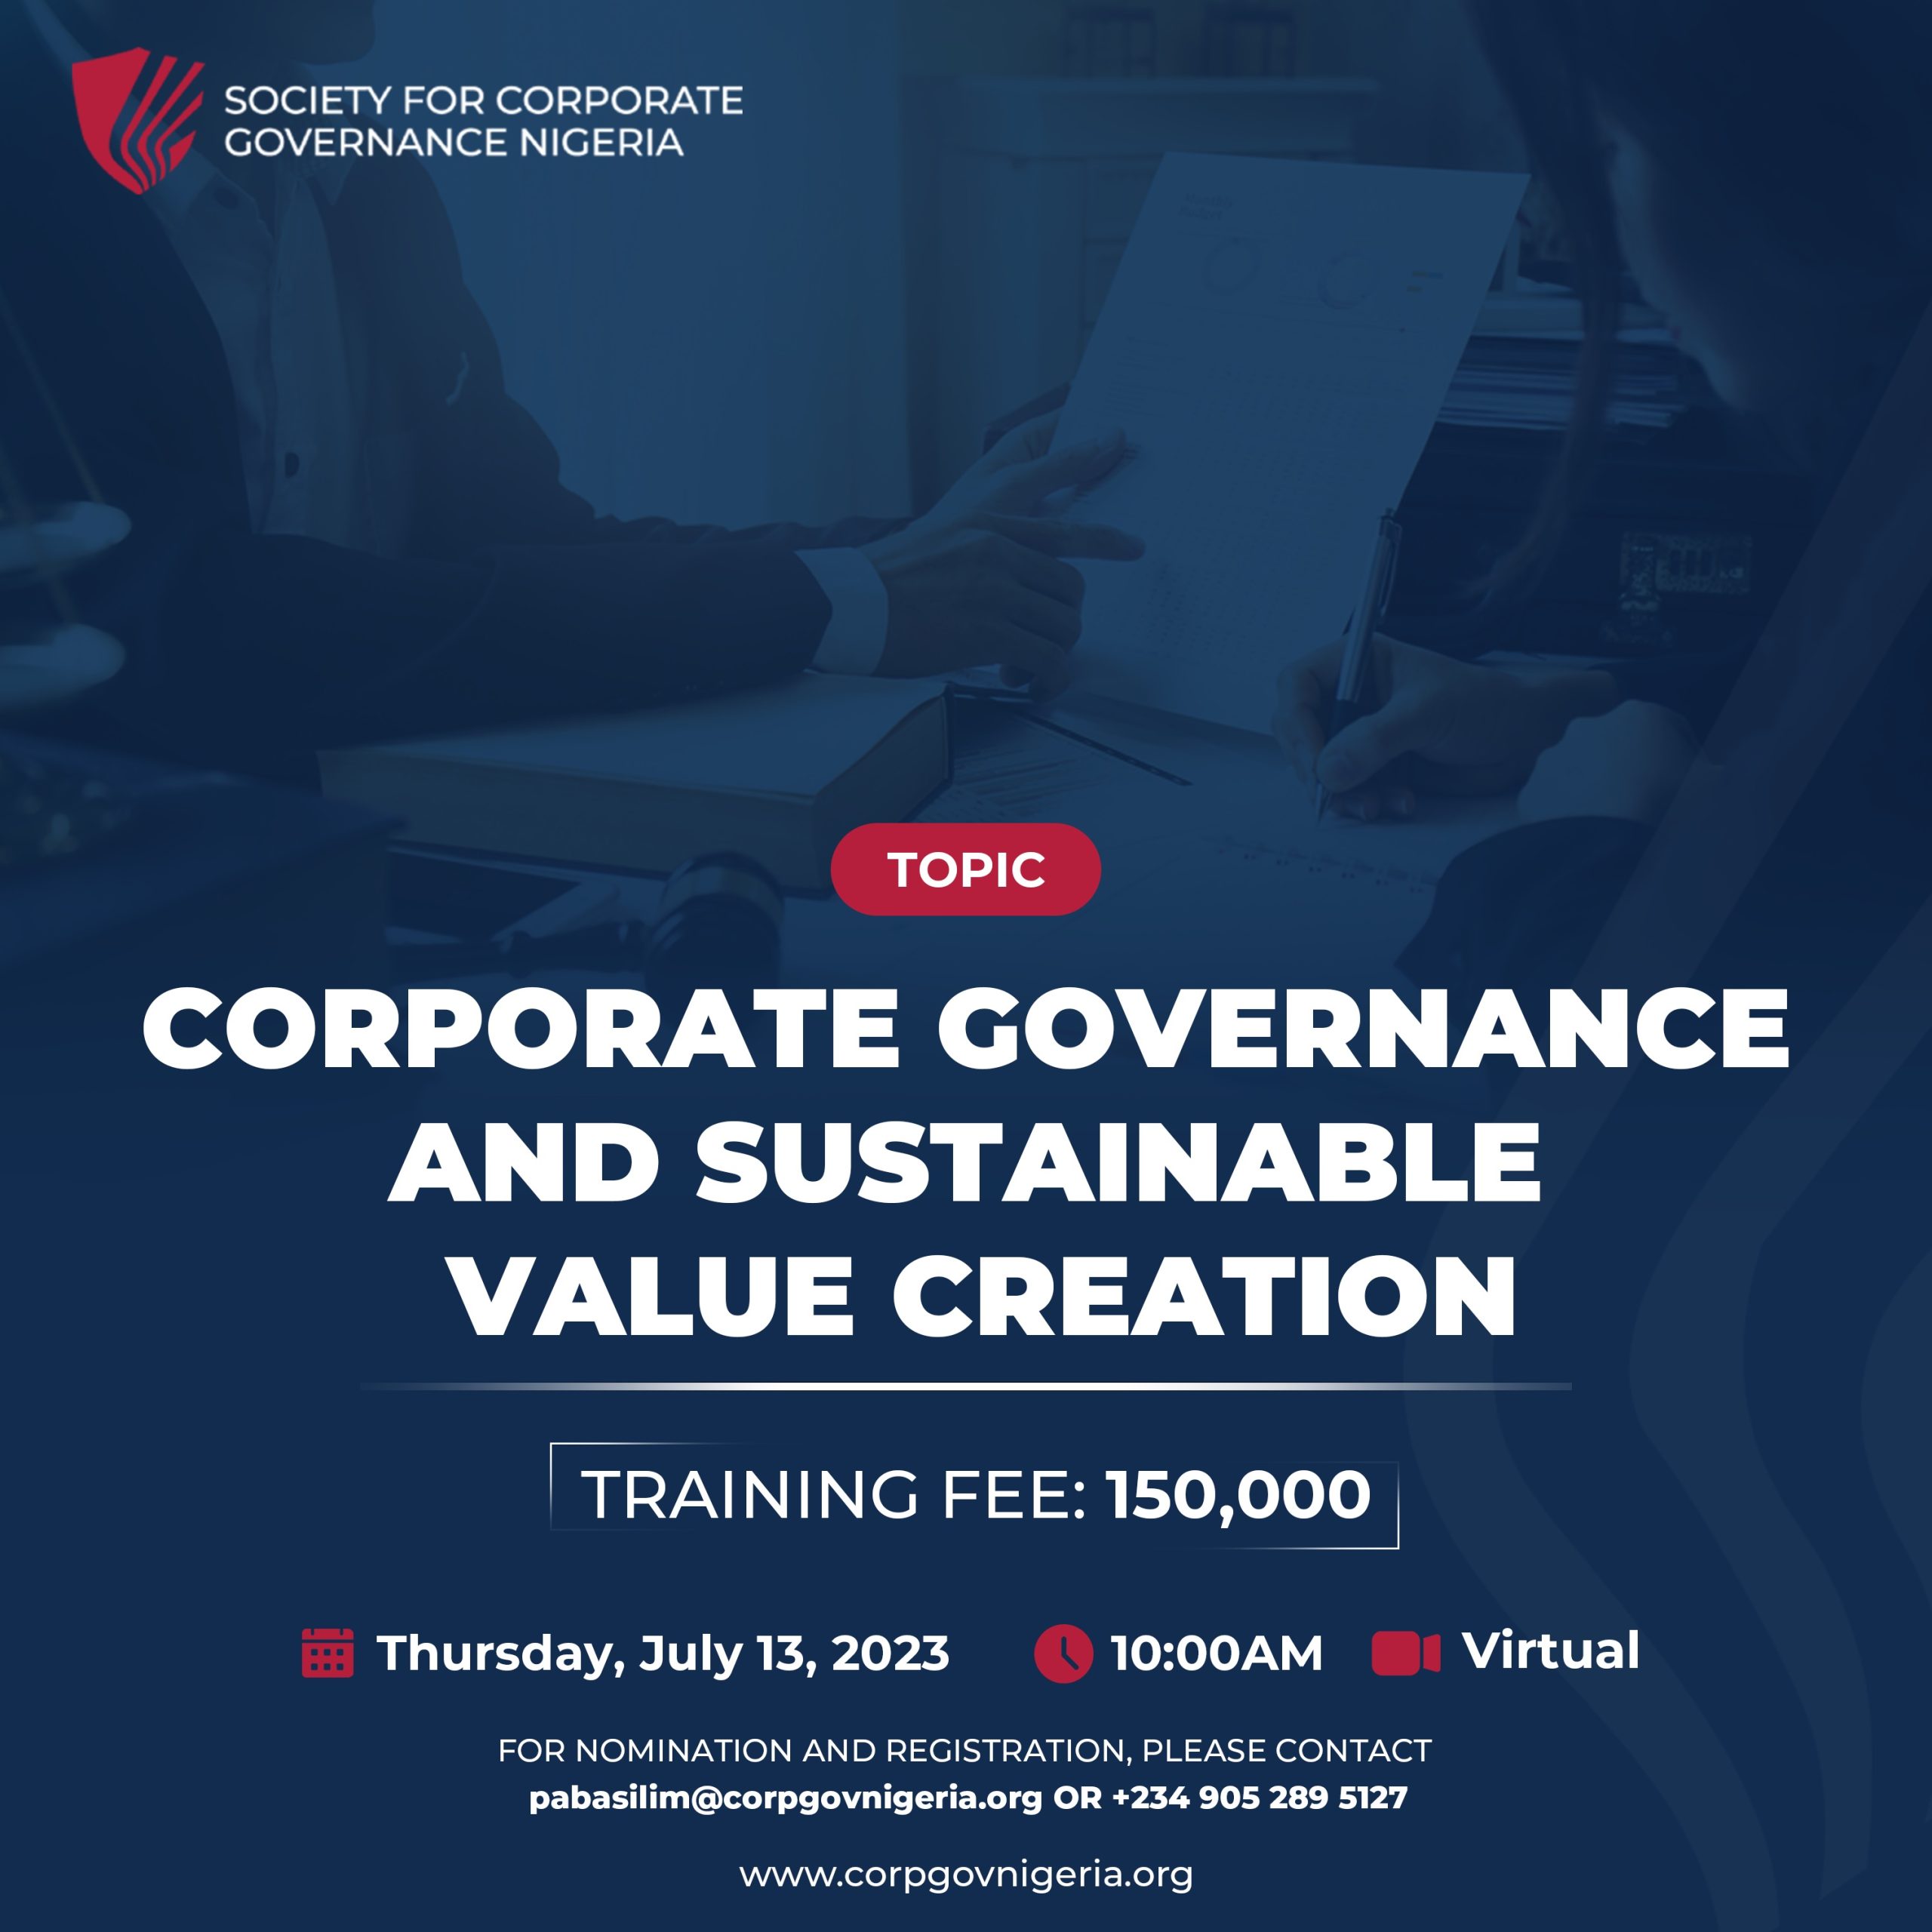 CORPORATE GOVERNANCE AND SUSTAINABLE VALUE CREATION